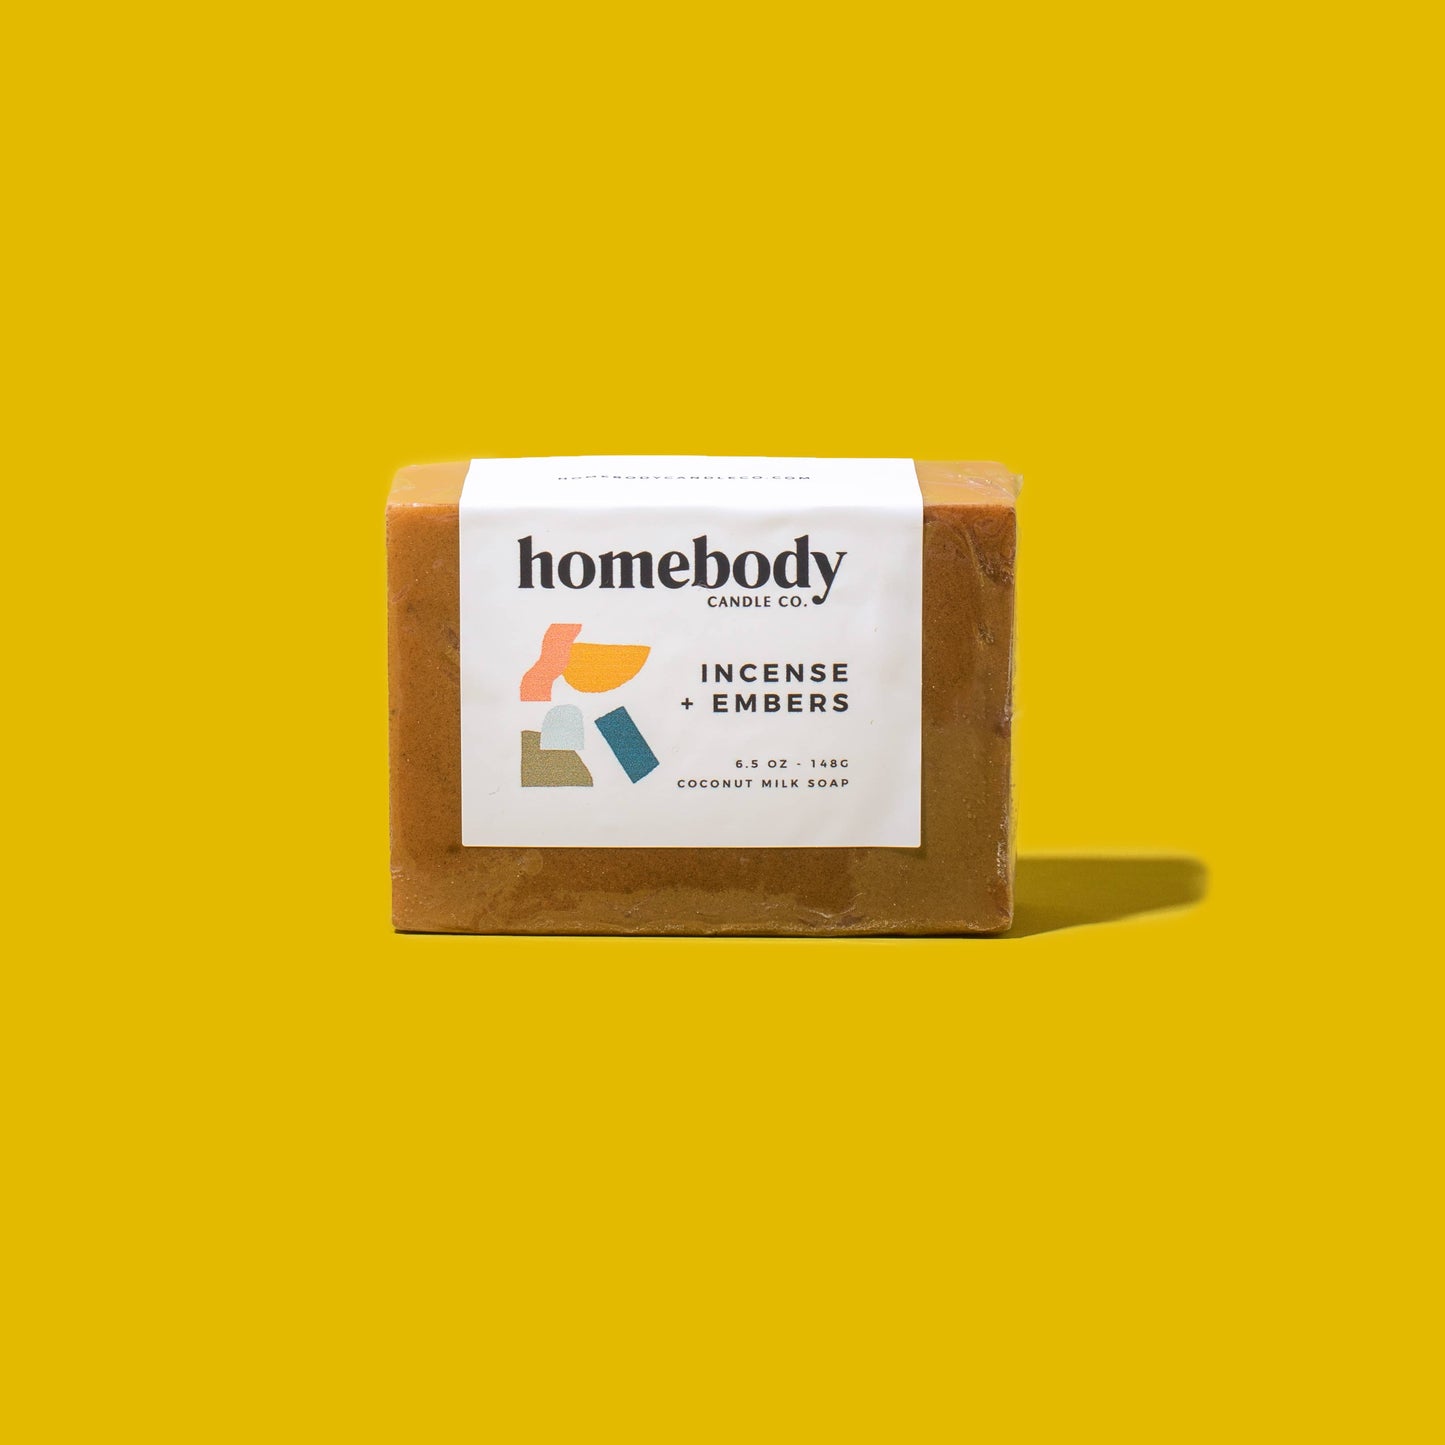 Homebody Candle Co. - Incense + Embers • milk soap